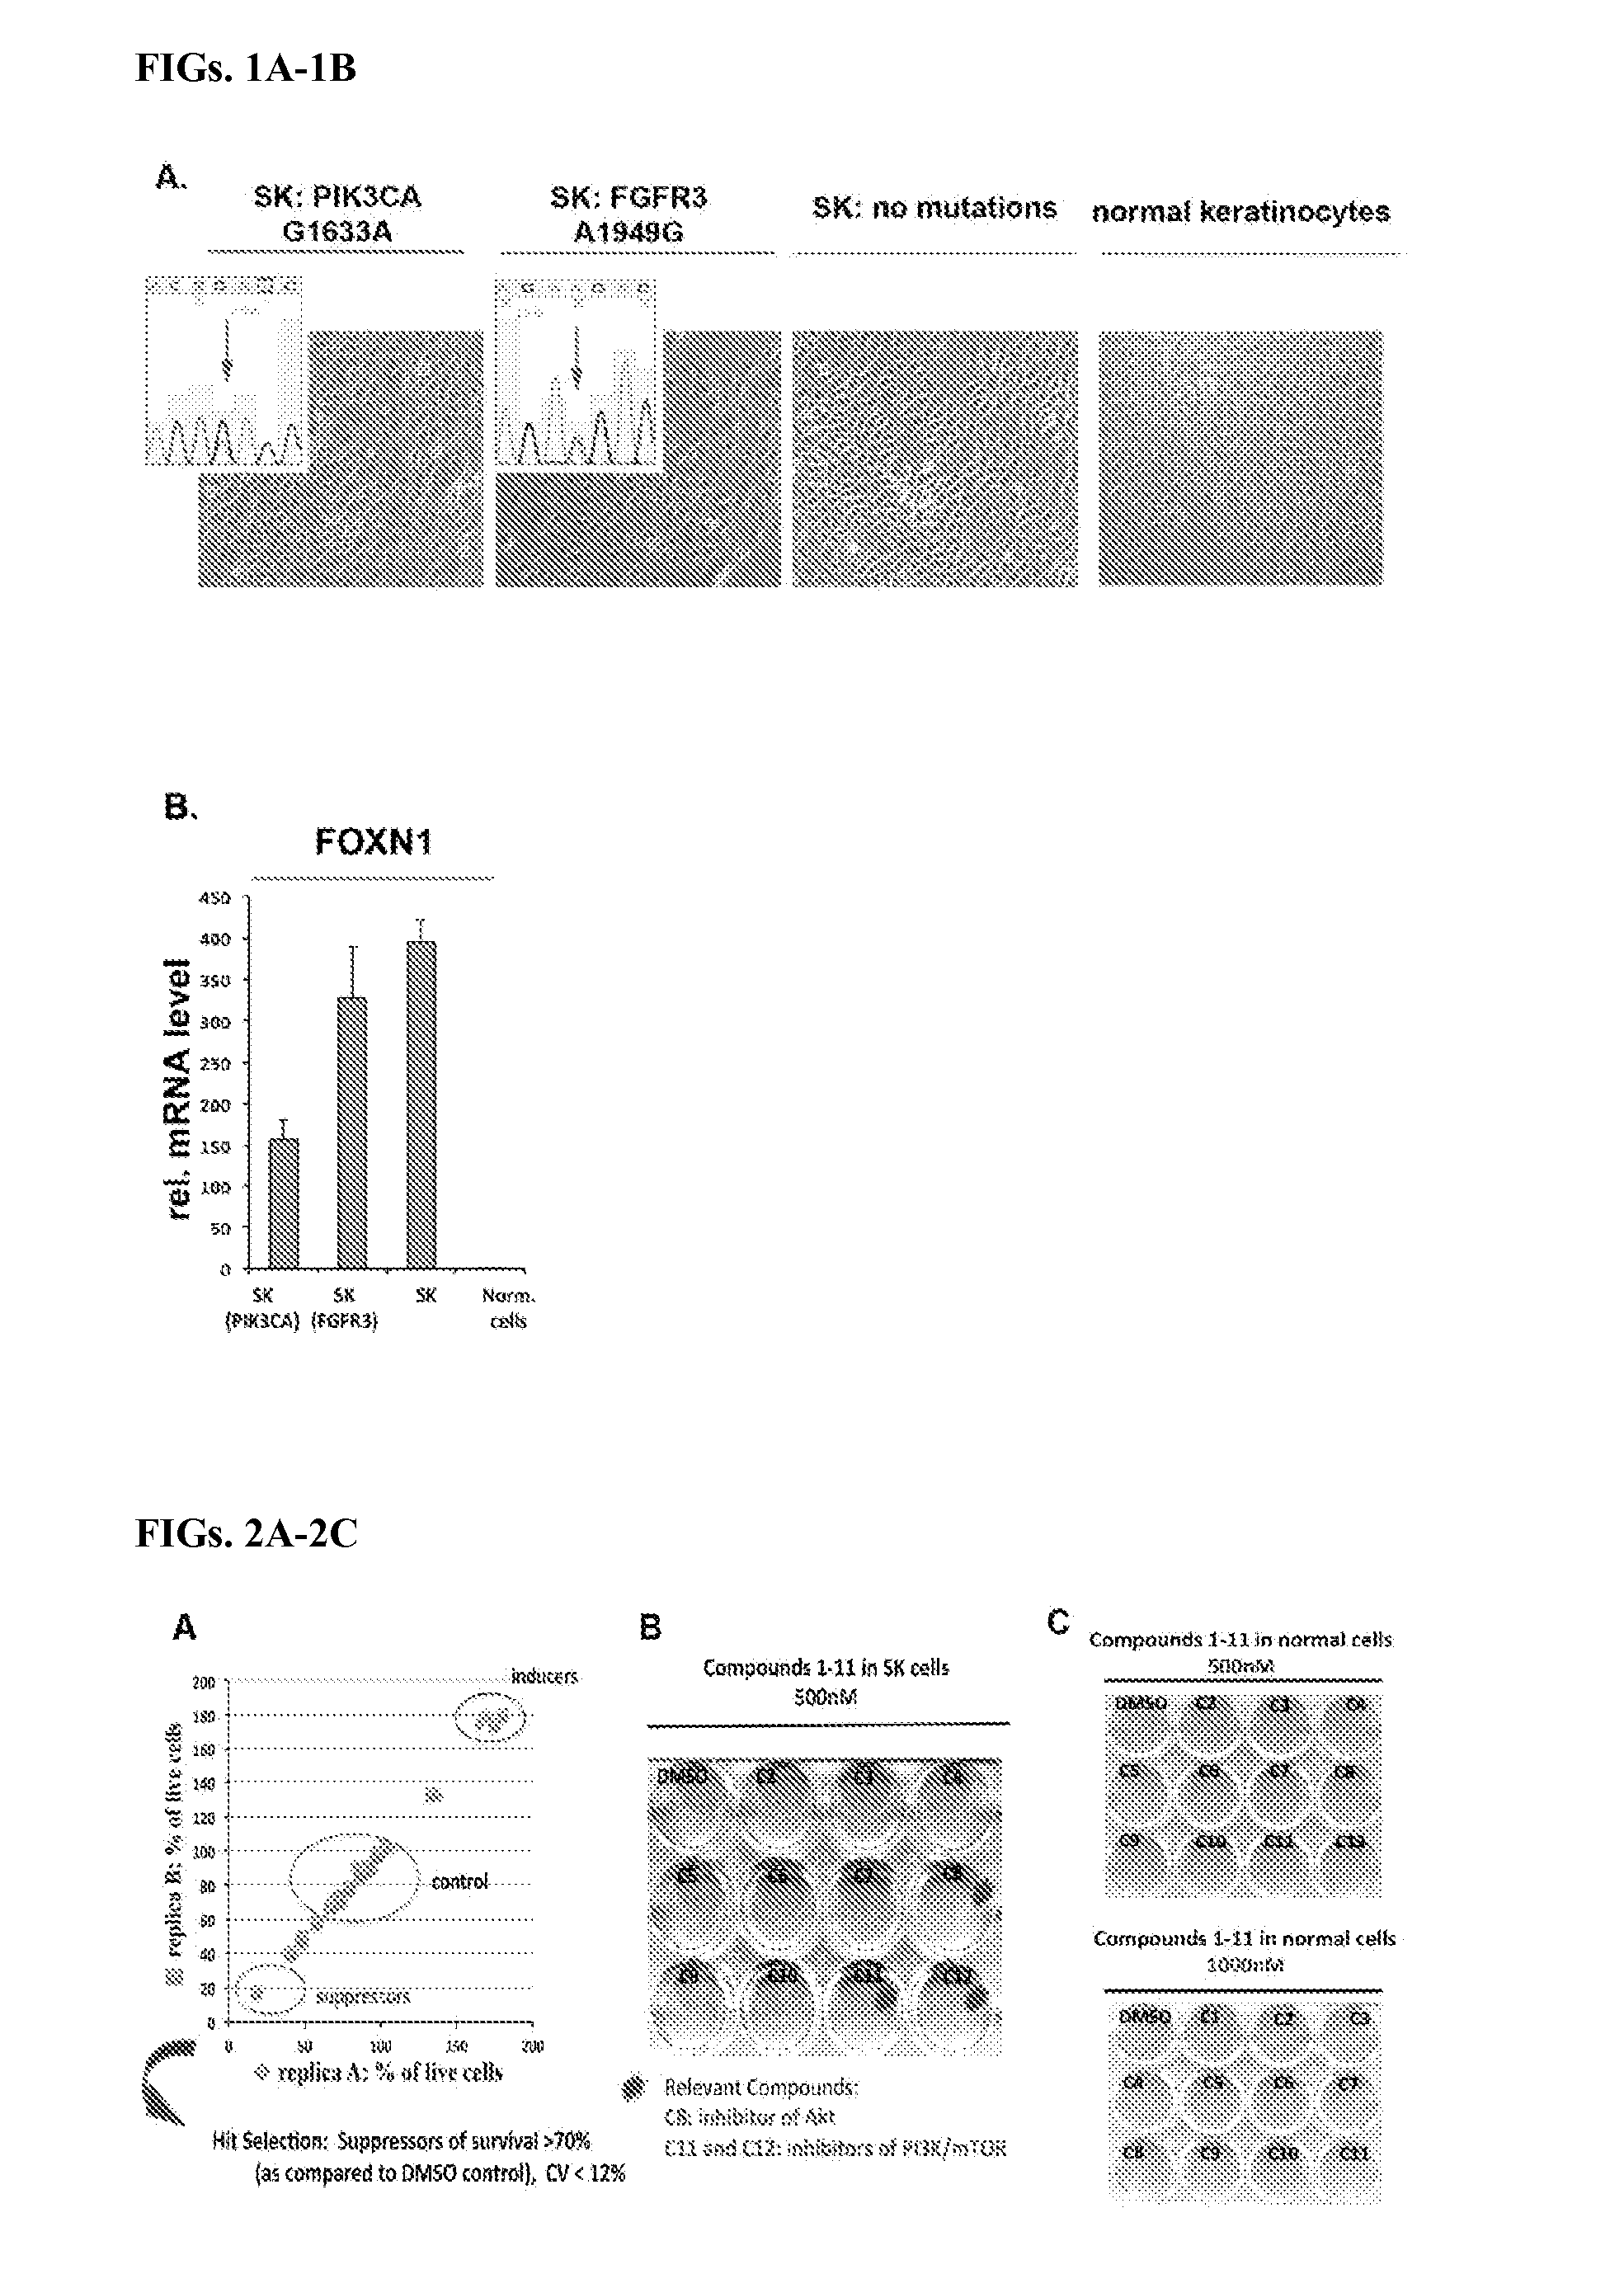 Agents and methods for treating and preventing seborrheic keratosis